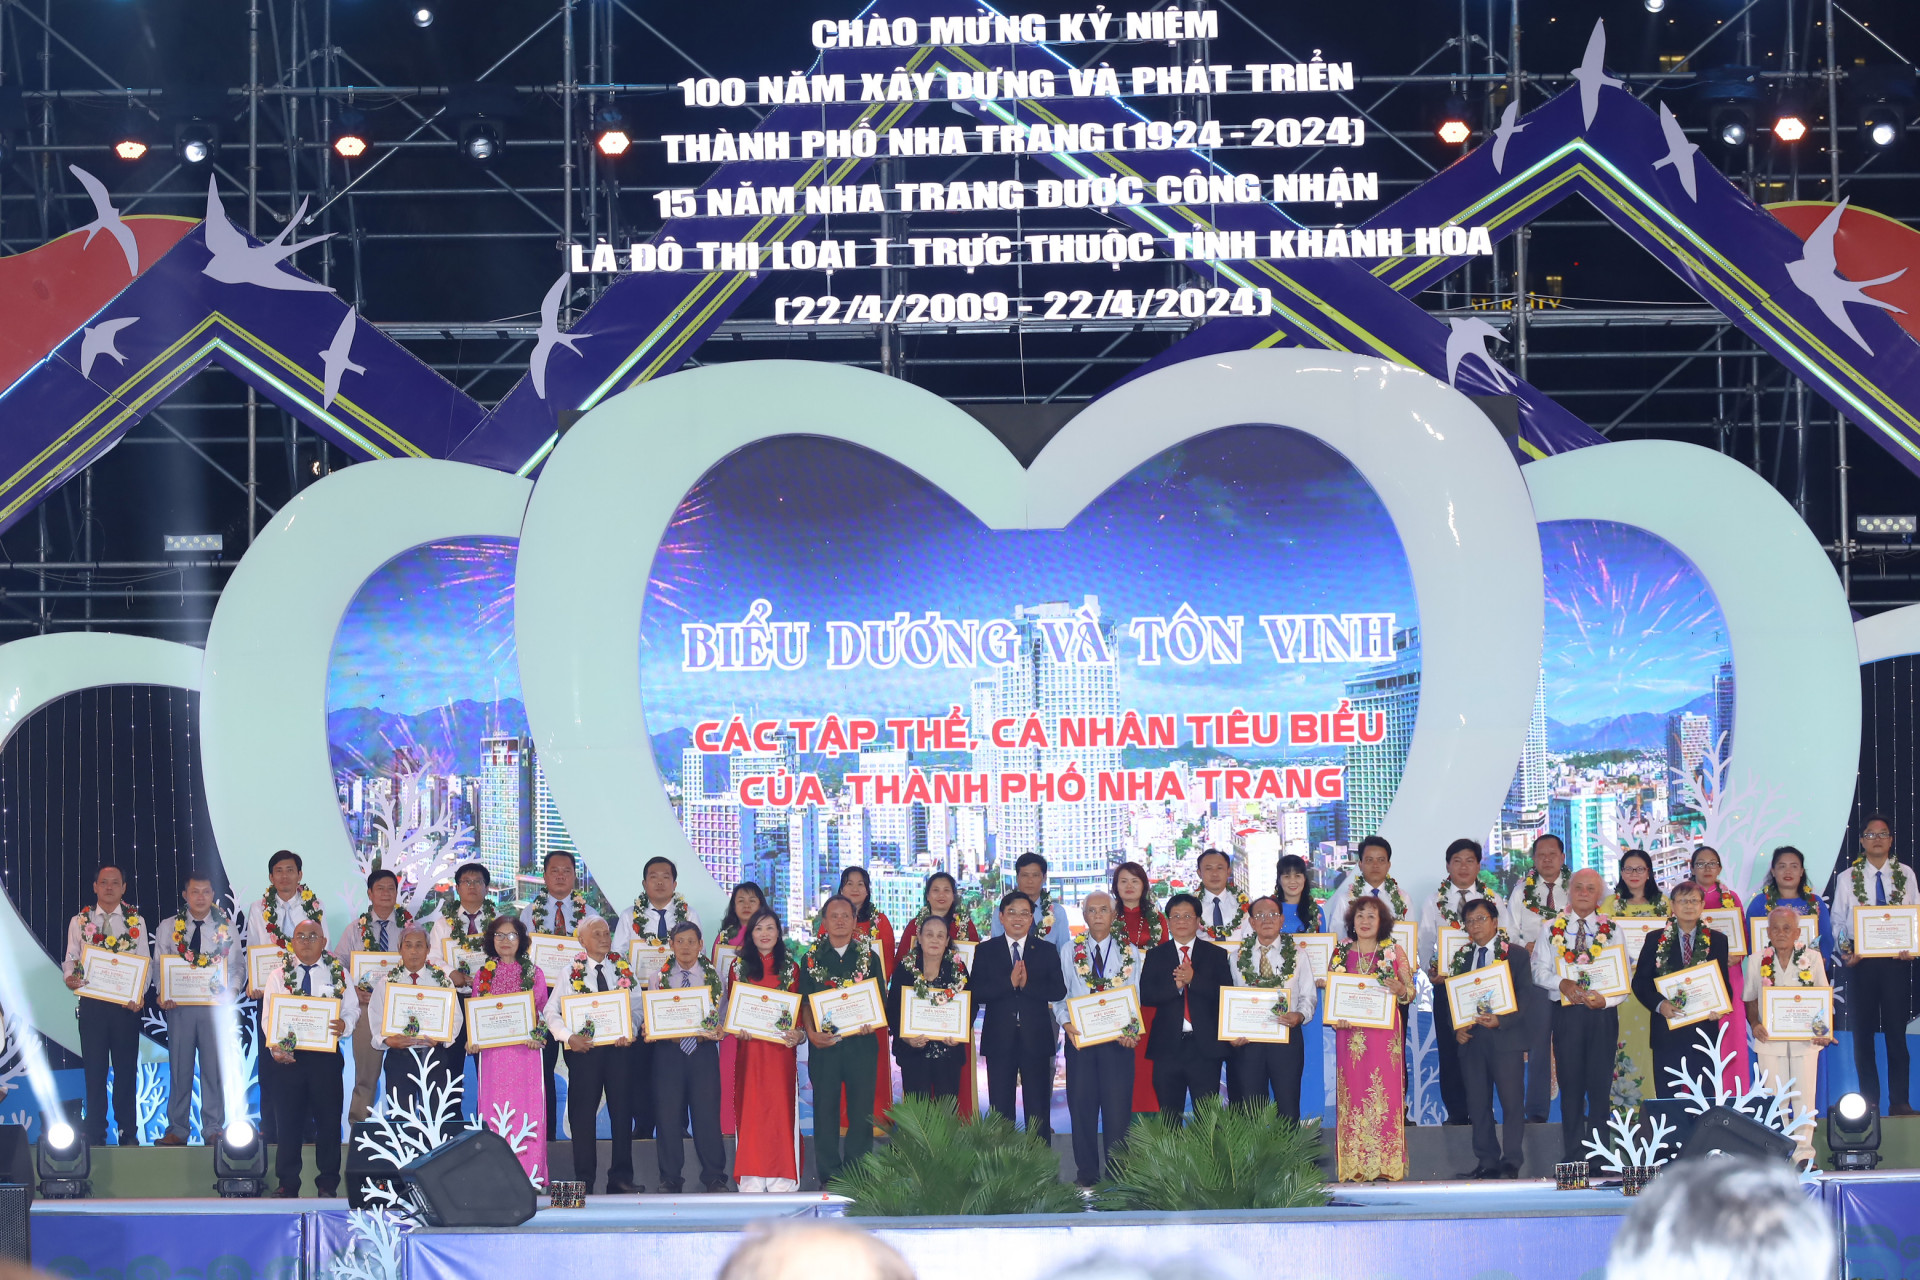 Nha Trang City’s leaders giving awards to outstanding collectives and individuals

